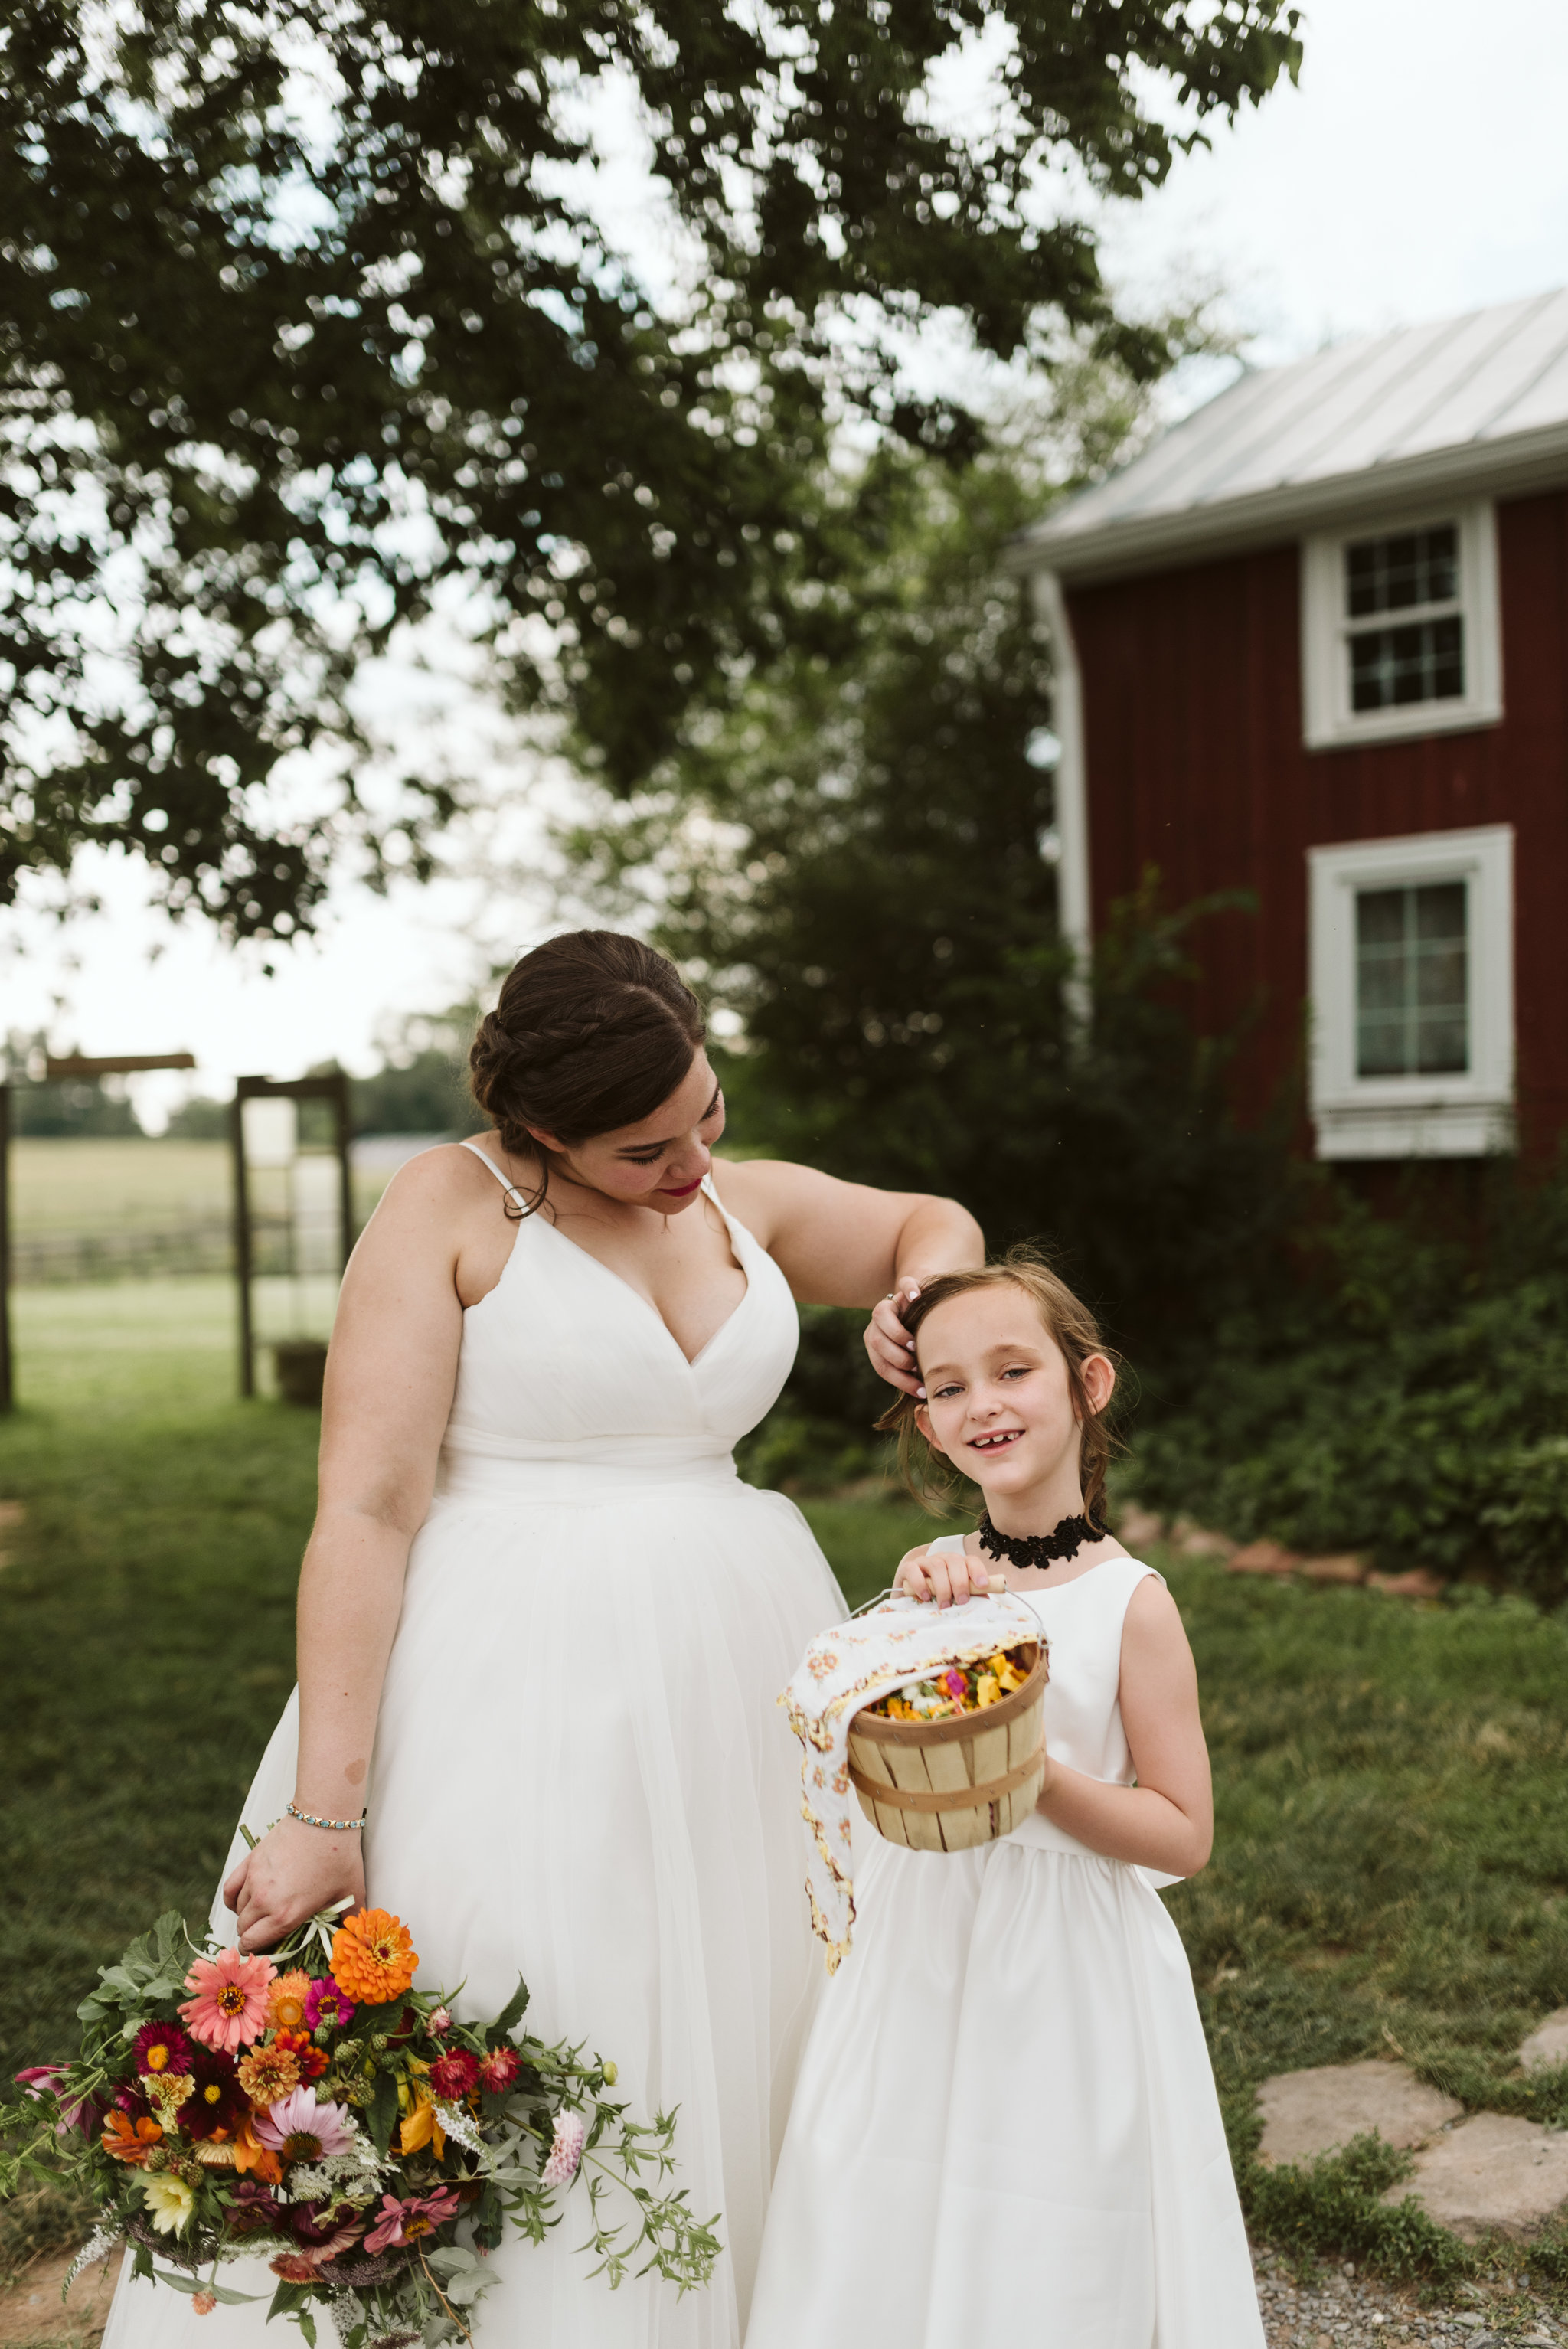 Rocklands Farm, Maryland, Intimate Wedding, Baltimore Wedding Photographer, Sungold Flower Co, Rustic, Romantic, Barn Wedding, Bride with Flower Girl Before Ceremony